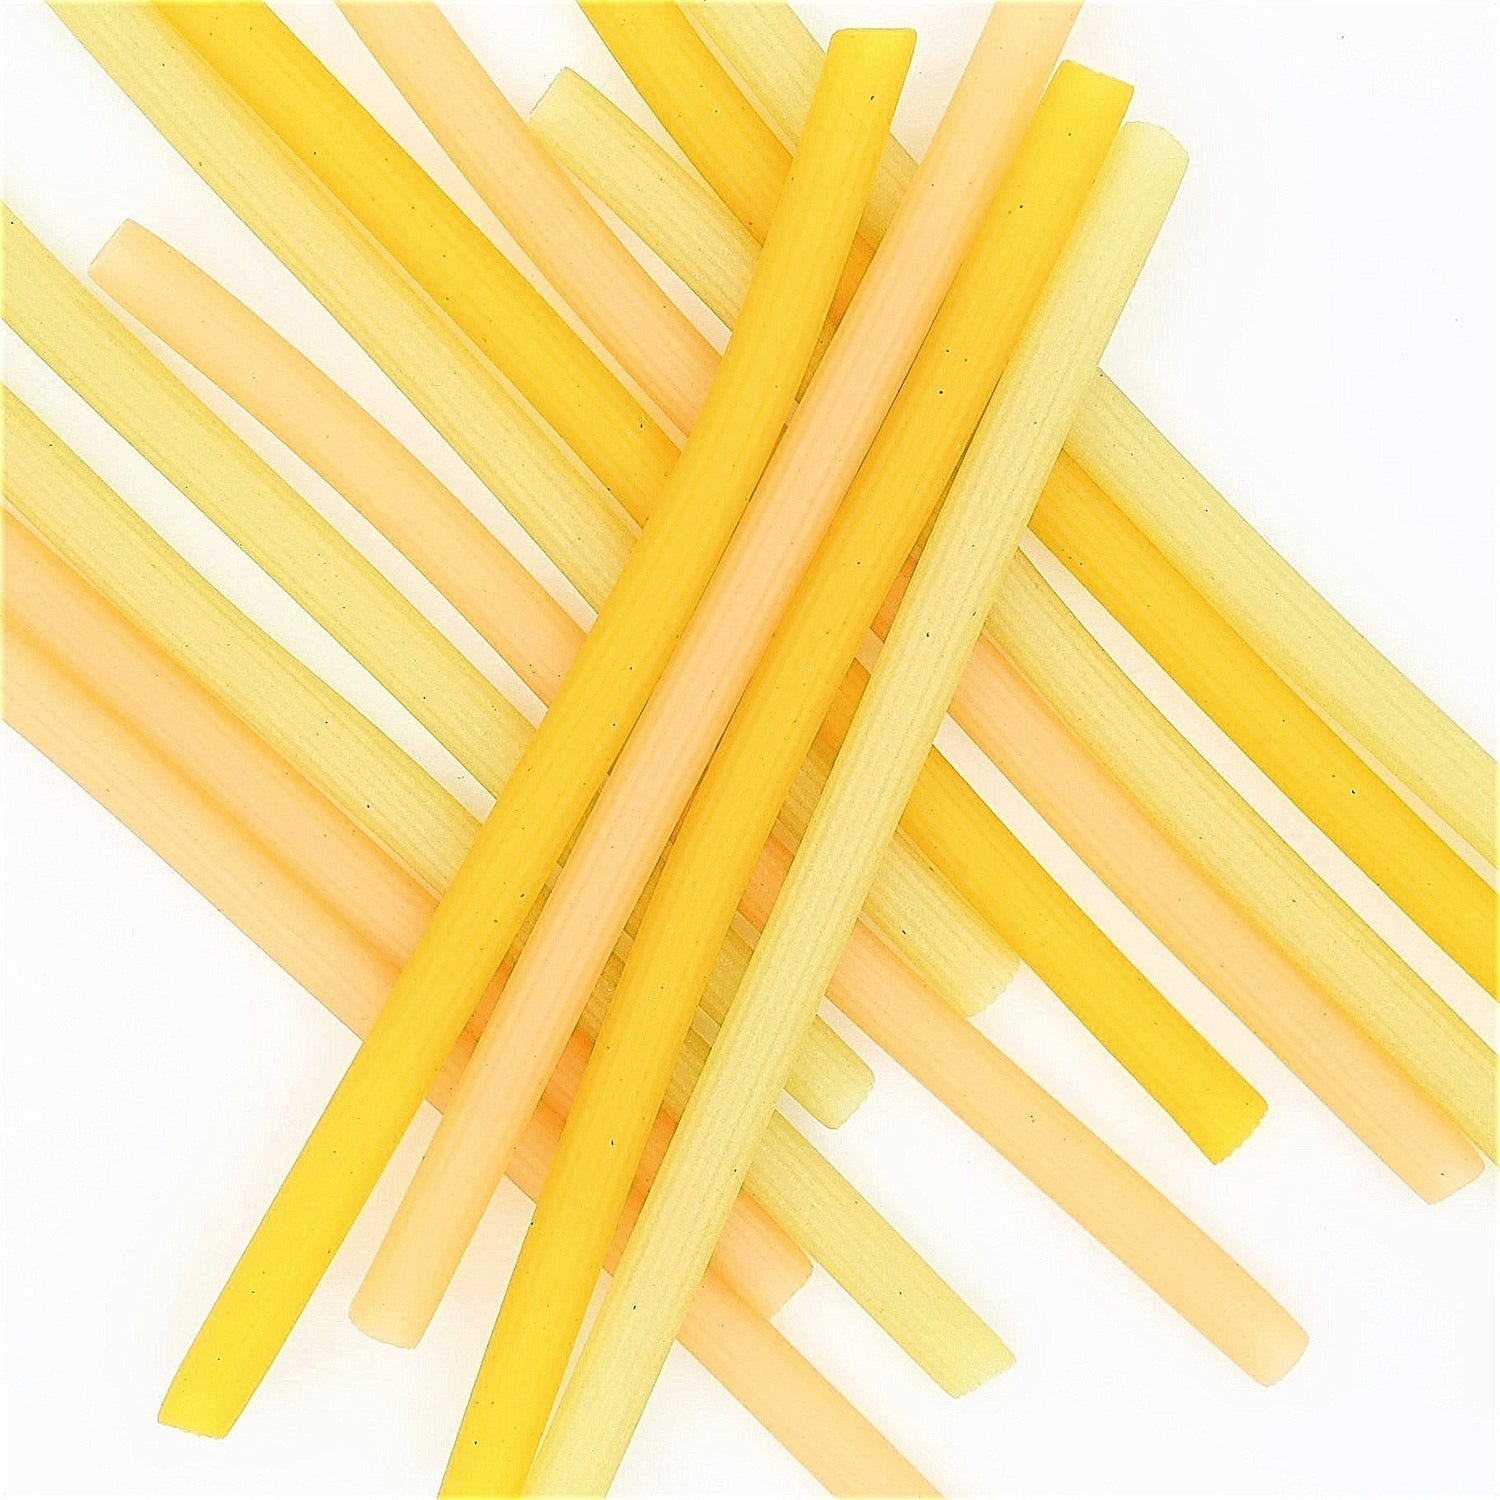 pasta straws canu gluten free and organic from the top